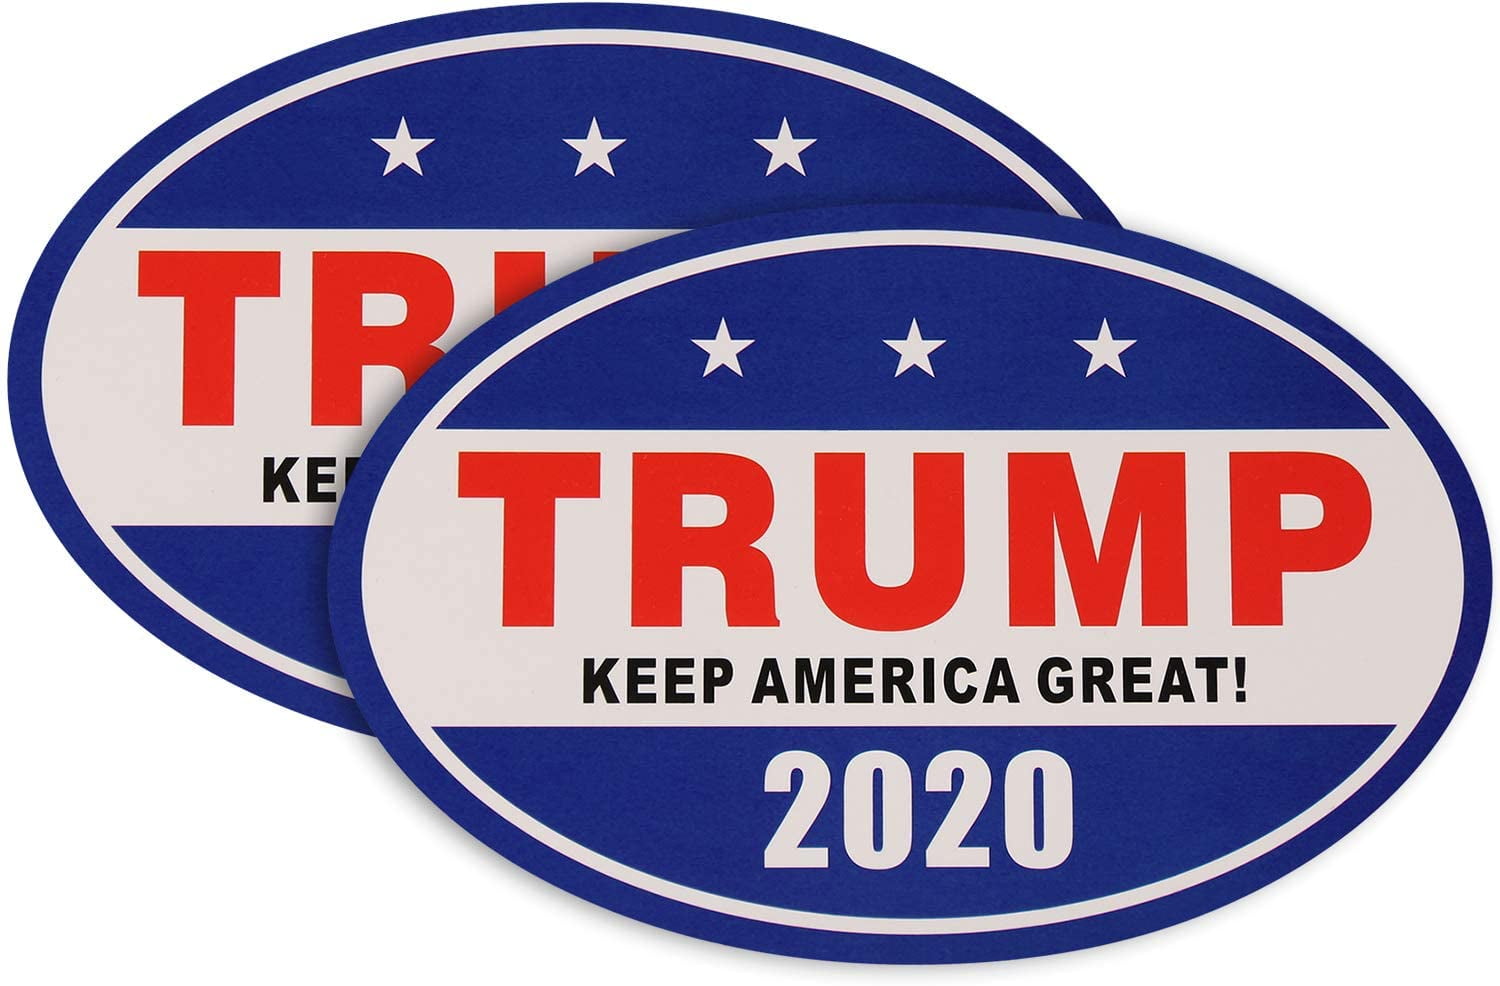 Wholesale Lot of 6 Americans For Trump Keep America Great Black Bumper Sticker 